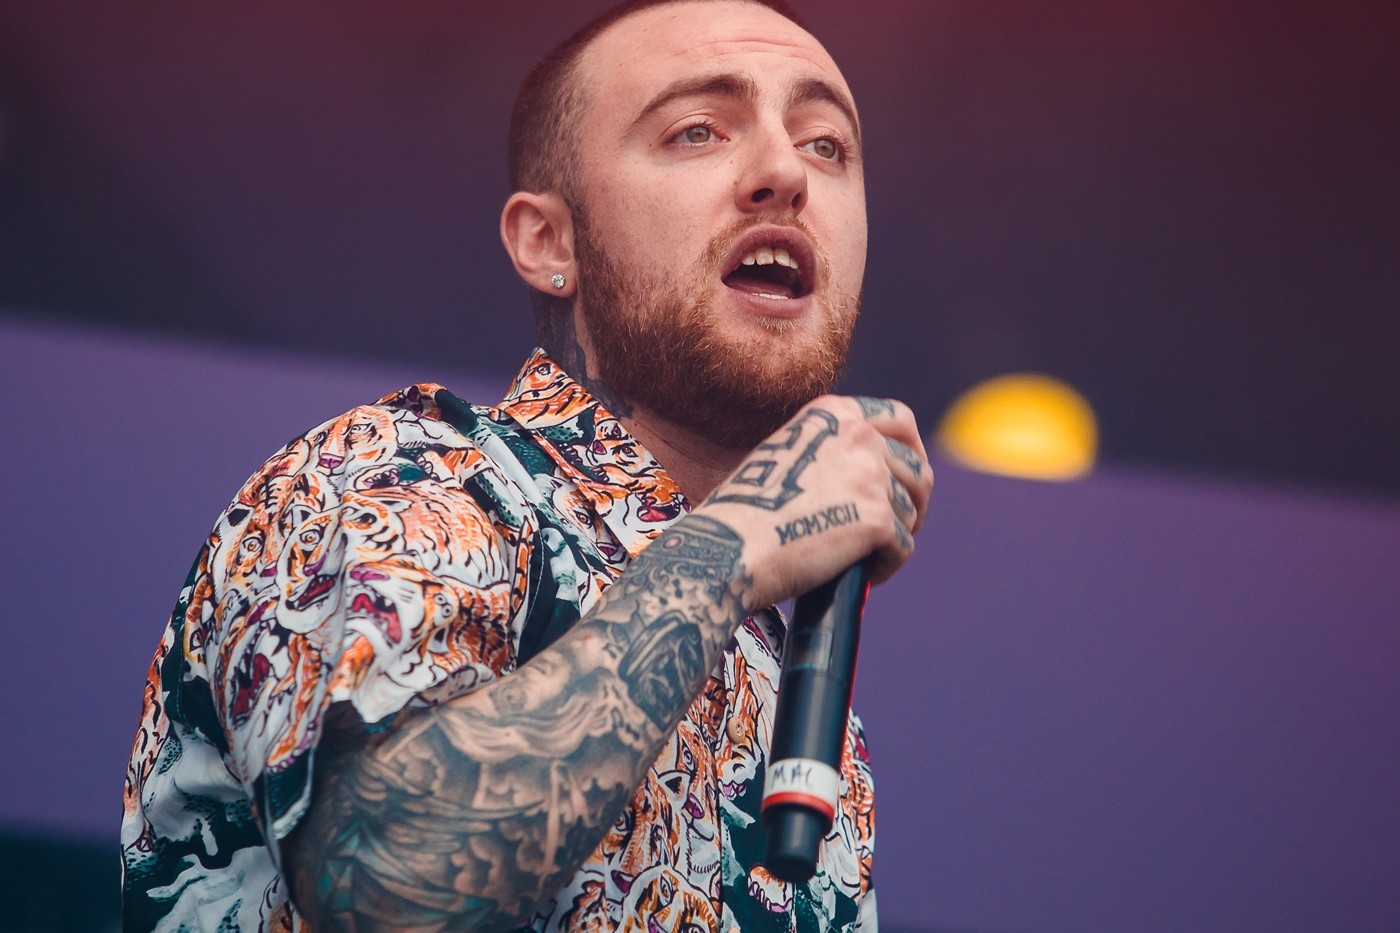 Expect a tribute to Mac Miller when Post Malone returns to